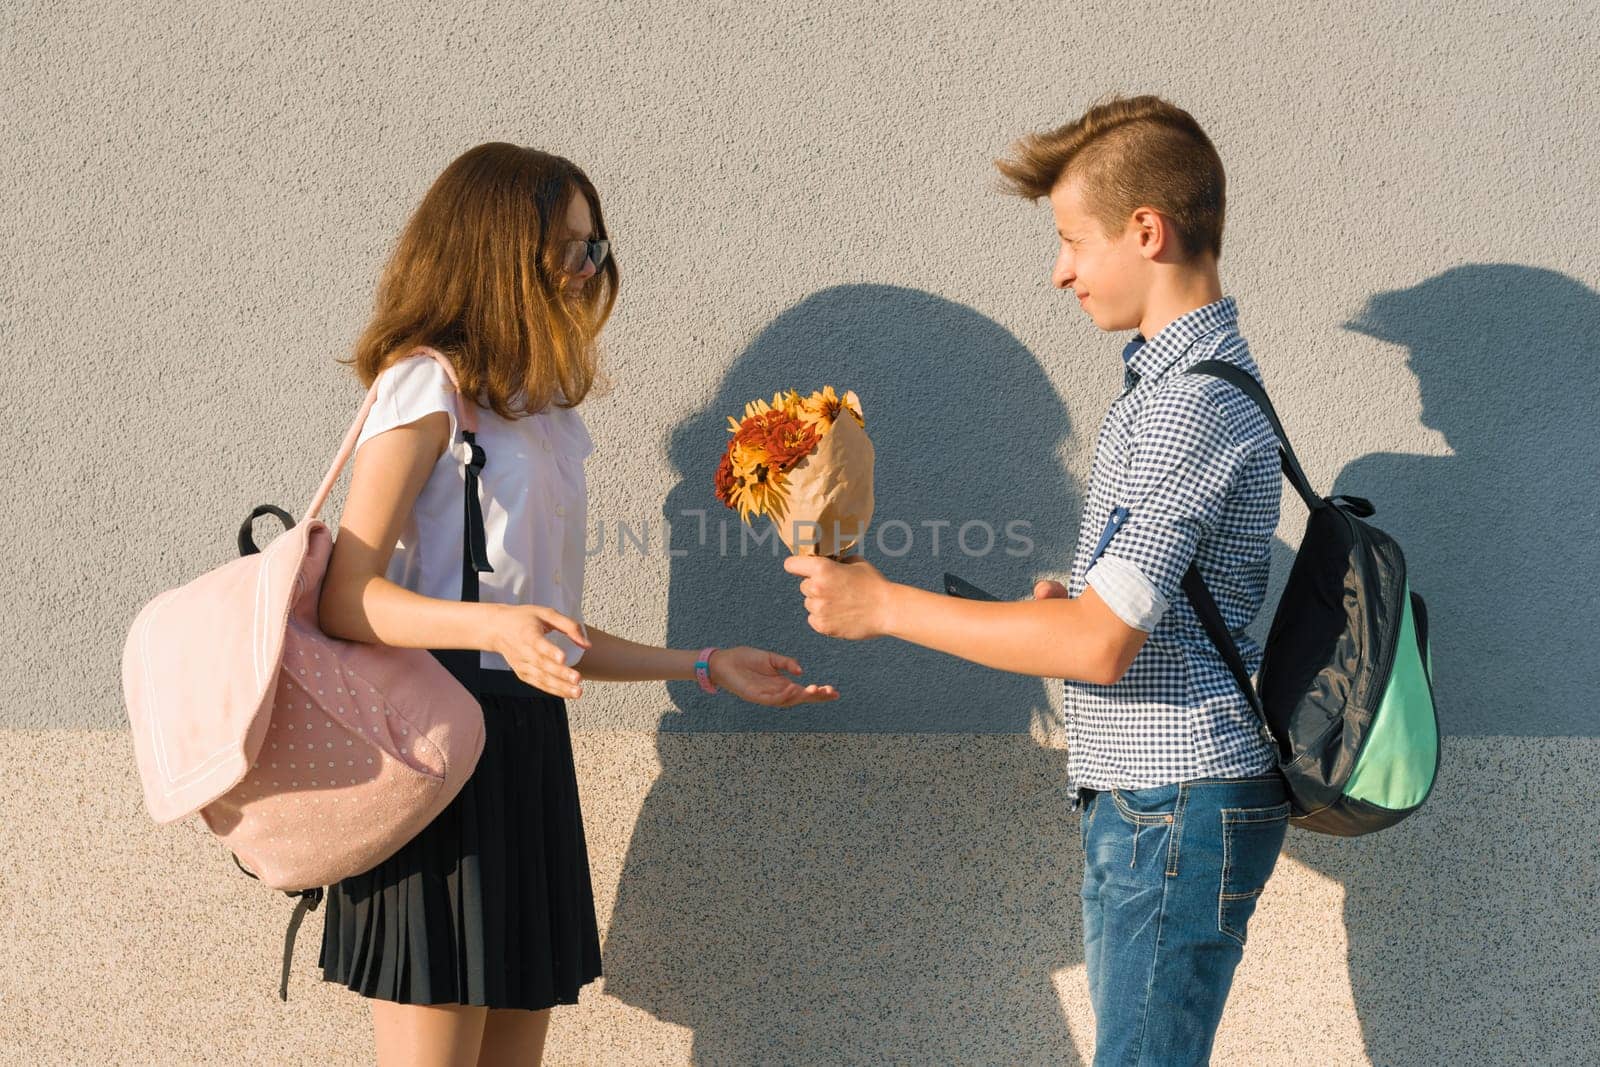 Boy gives girl bouquet of flowers. Outdoor portrait of couple teenagers by VH-studio